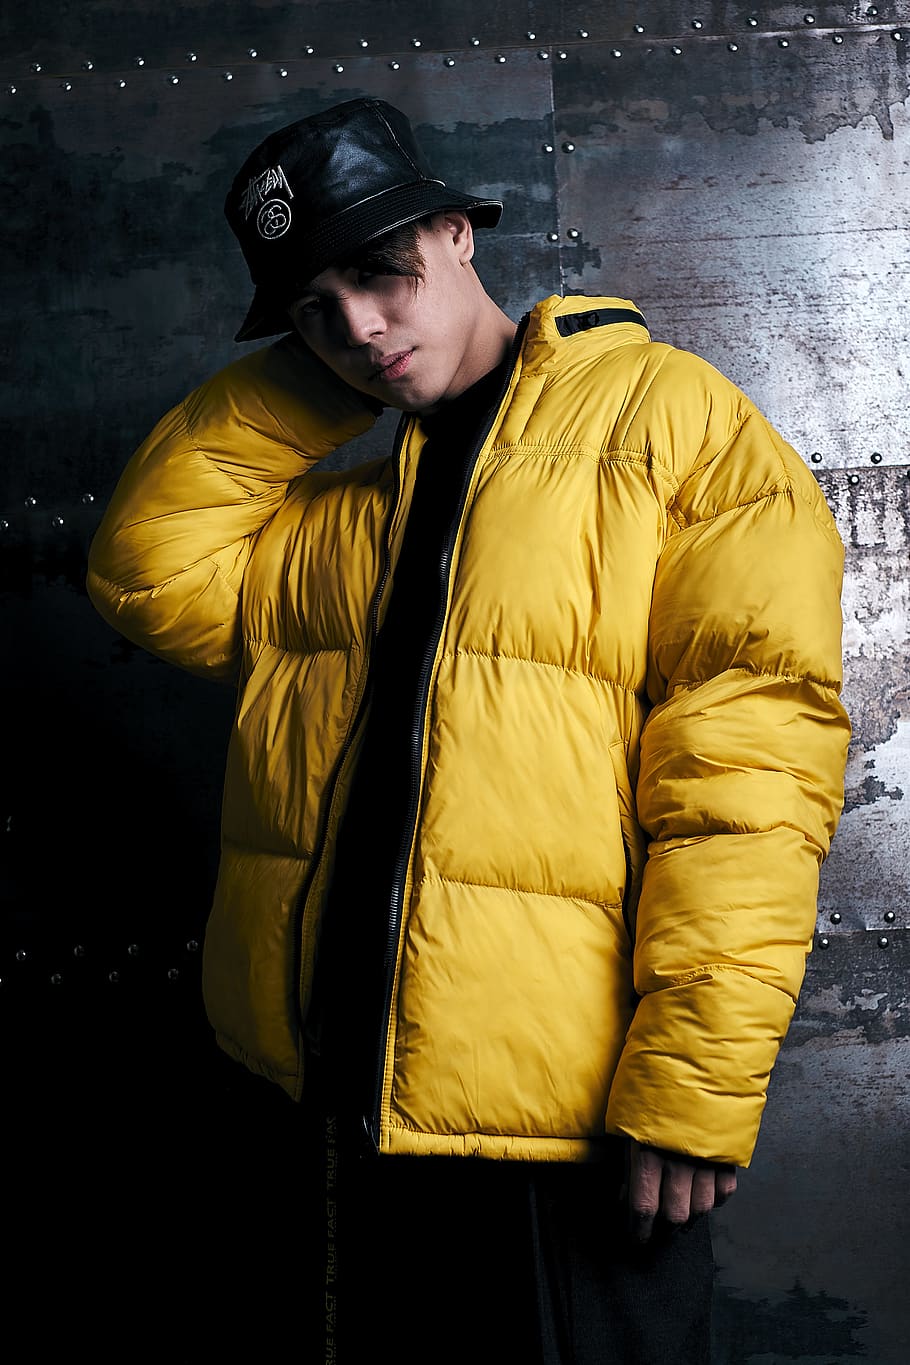 man wearing yellow zip-up jacket, one person, real people, clothing